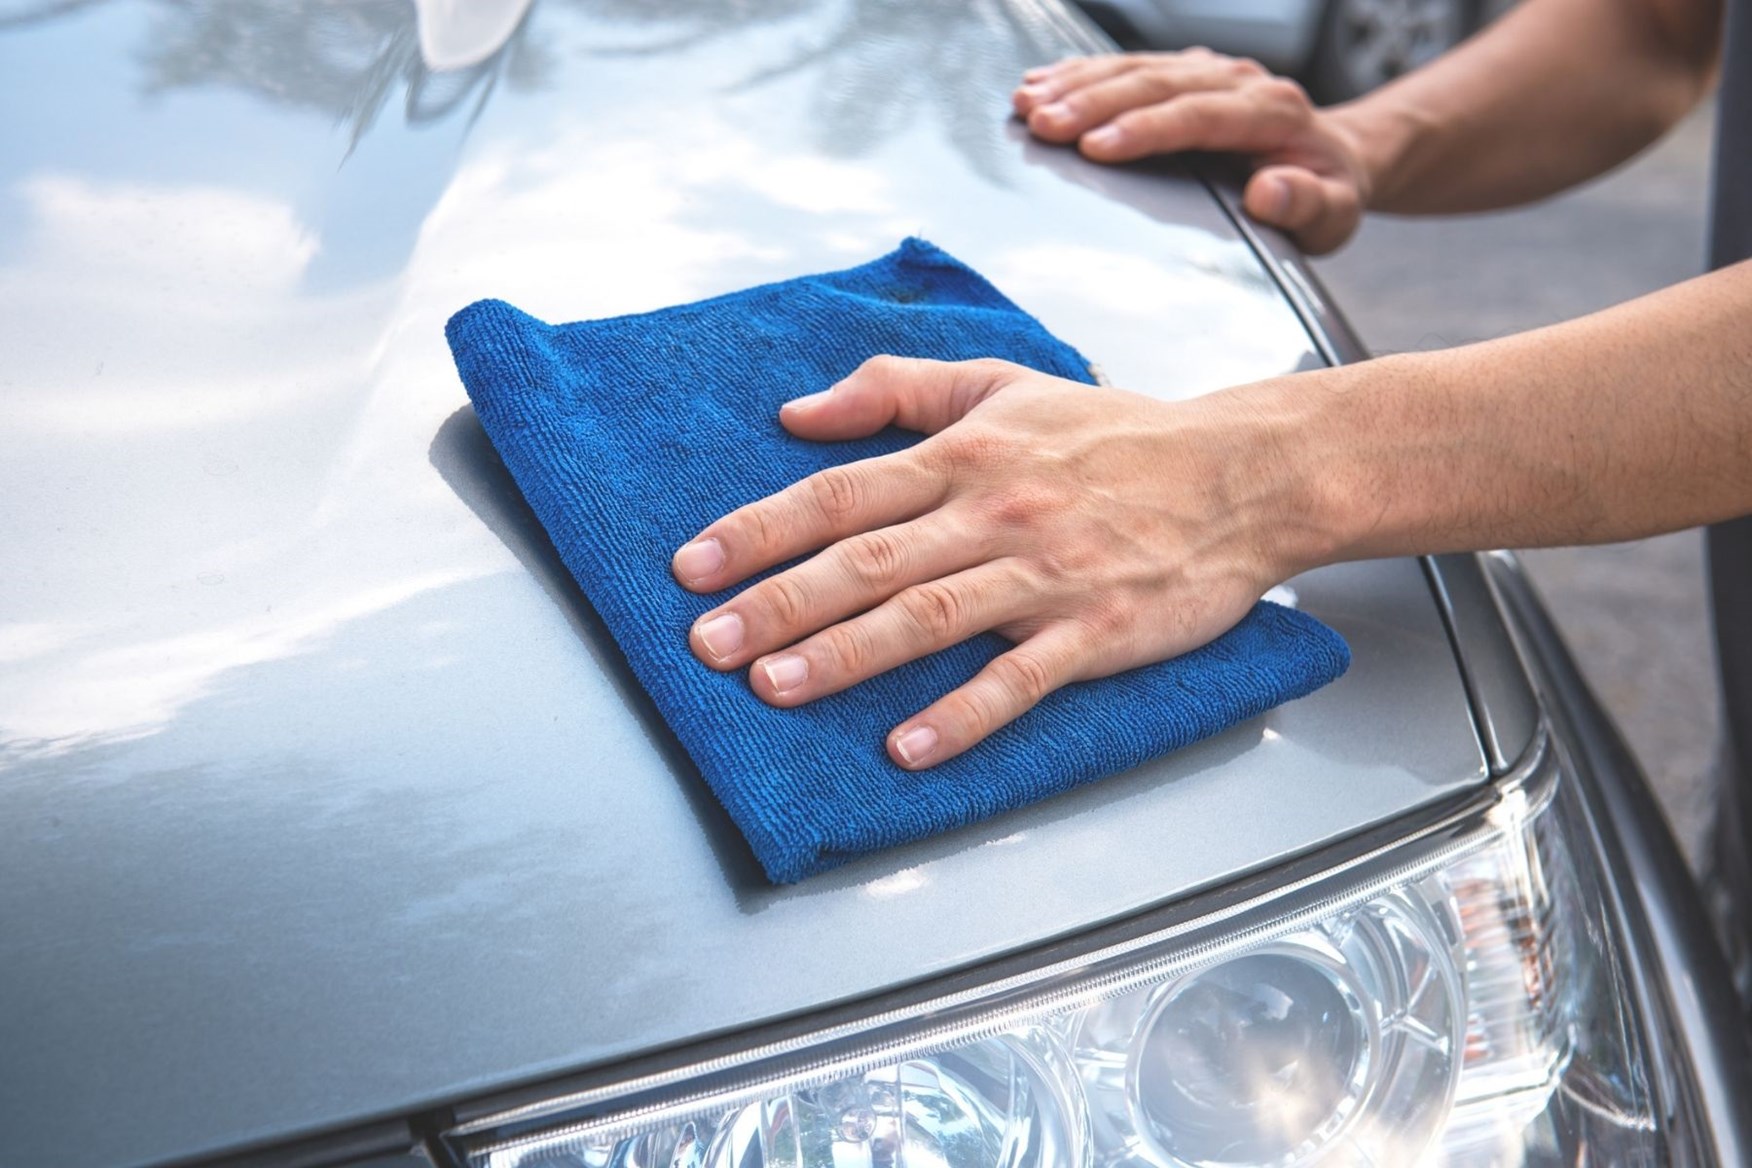 The best panel wipe for preparing a car for protection